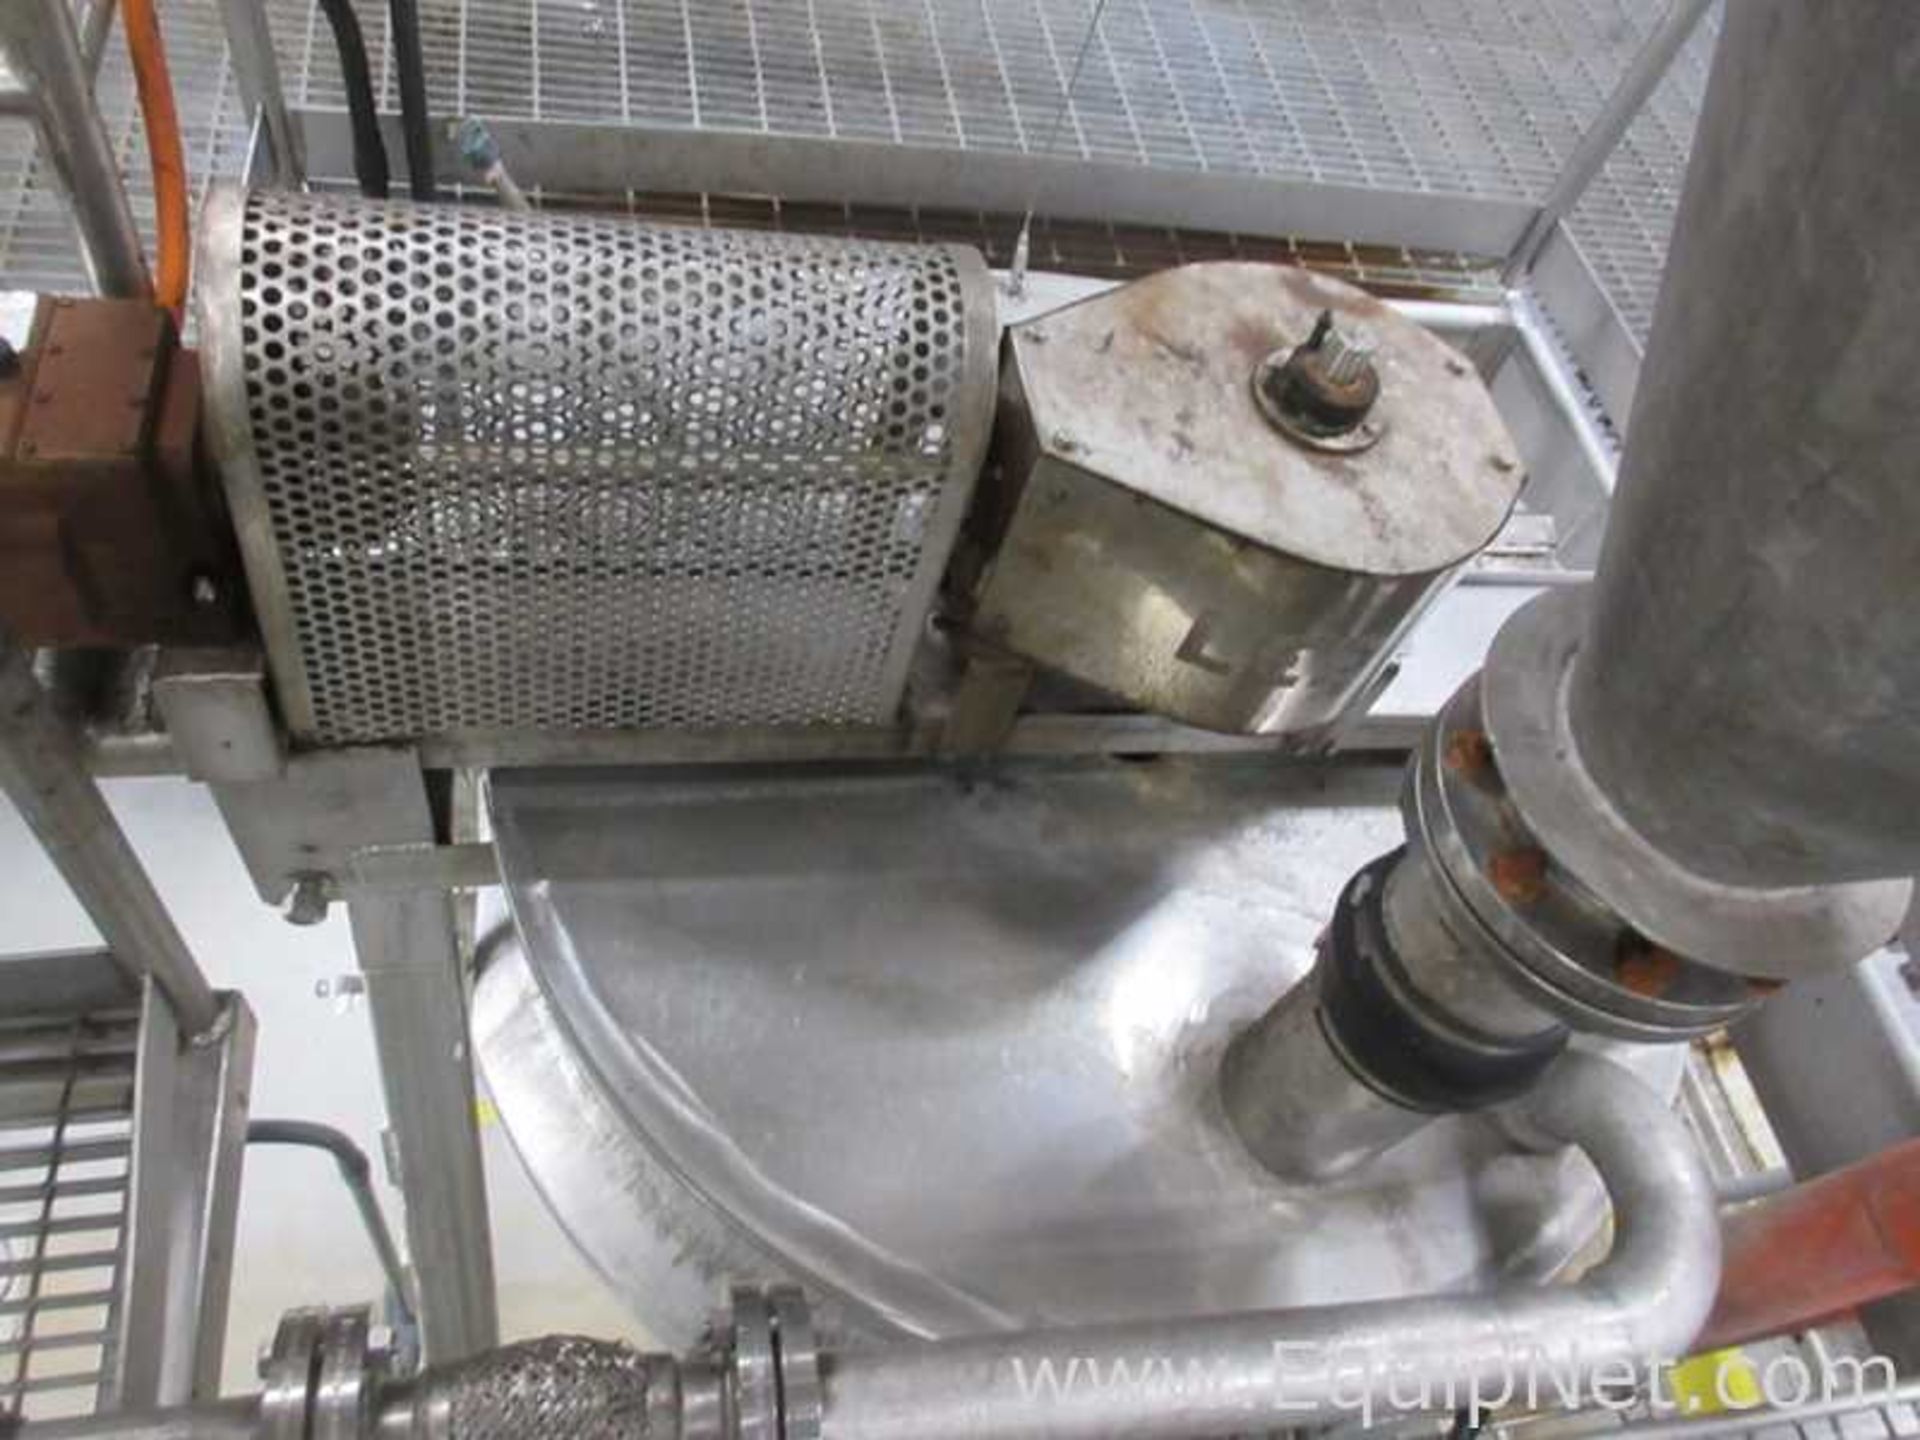 Lee Stainless Steel Double Motion Kettle With Progressive Cavity Pump - Image 7 of 14